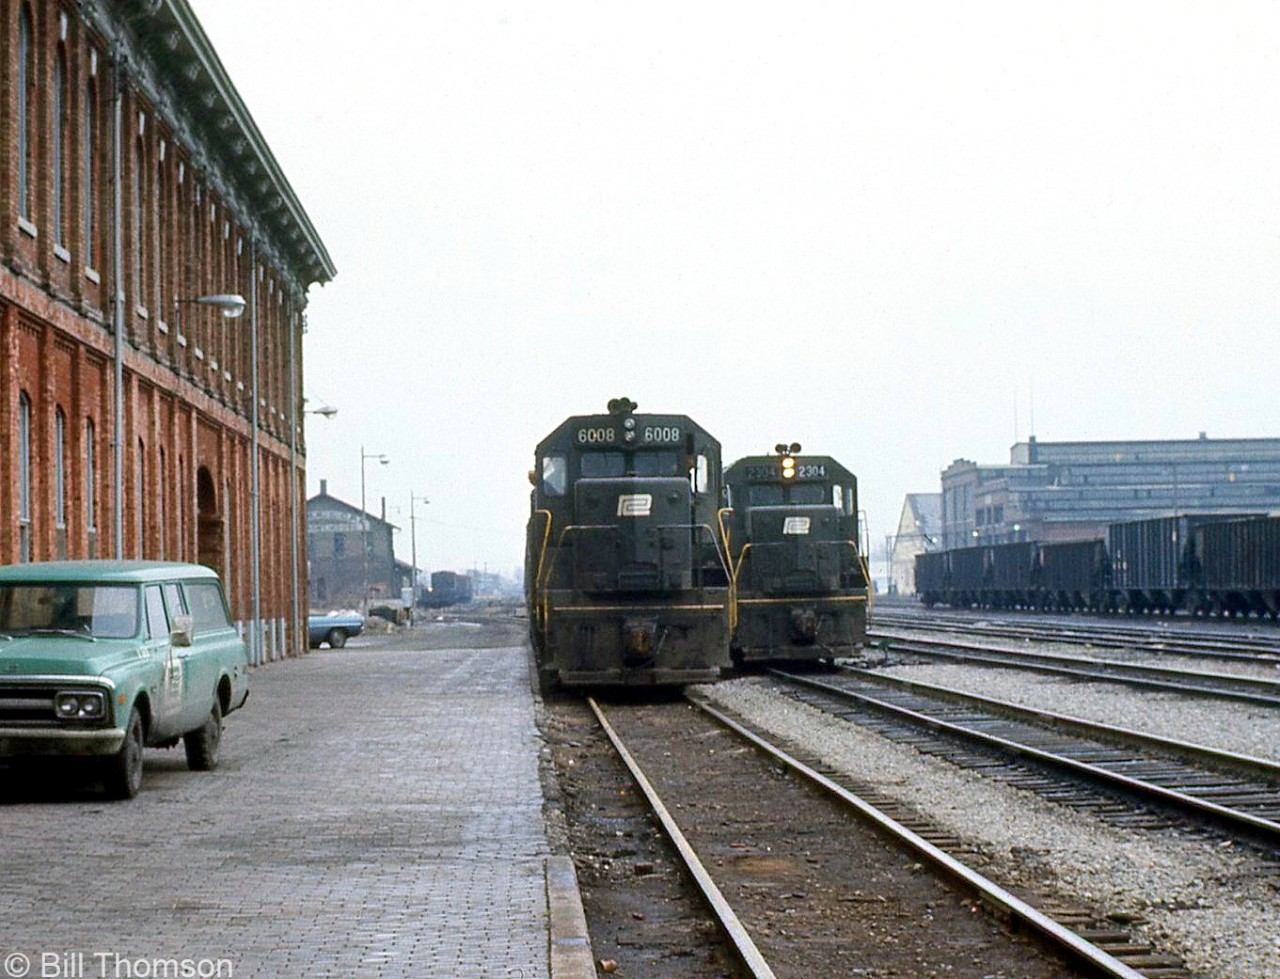 A view from the platforms of the old Canada Southern St. Thomas station one January day in 1973 shows westbound power posed by the station lead by Penn Central SD35 6008 and GP35 2304. A green PC vehicle is parked by the station, and behind in the distance is the old NYC-CPR freight house. Visible on the right beyond the cut of hoppers is PC's St. Thomas locomotive shops (originally built in 1913 by the Michigan Central RR). Today all the rails have been removed, but the station and shop building remain.